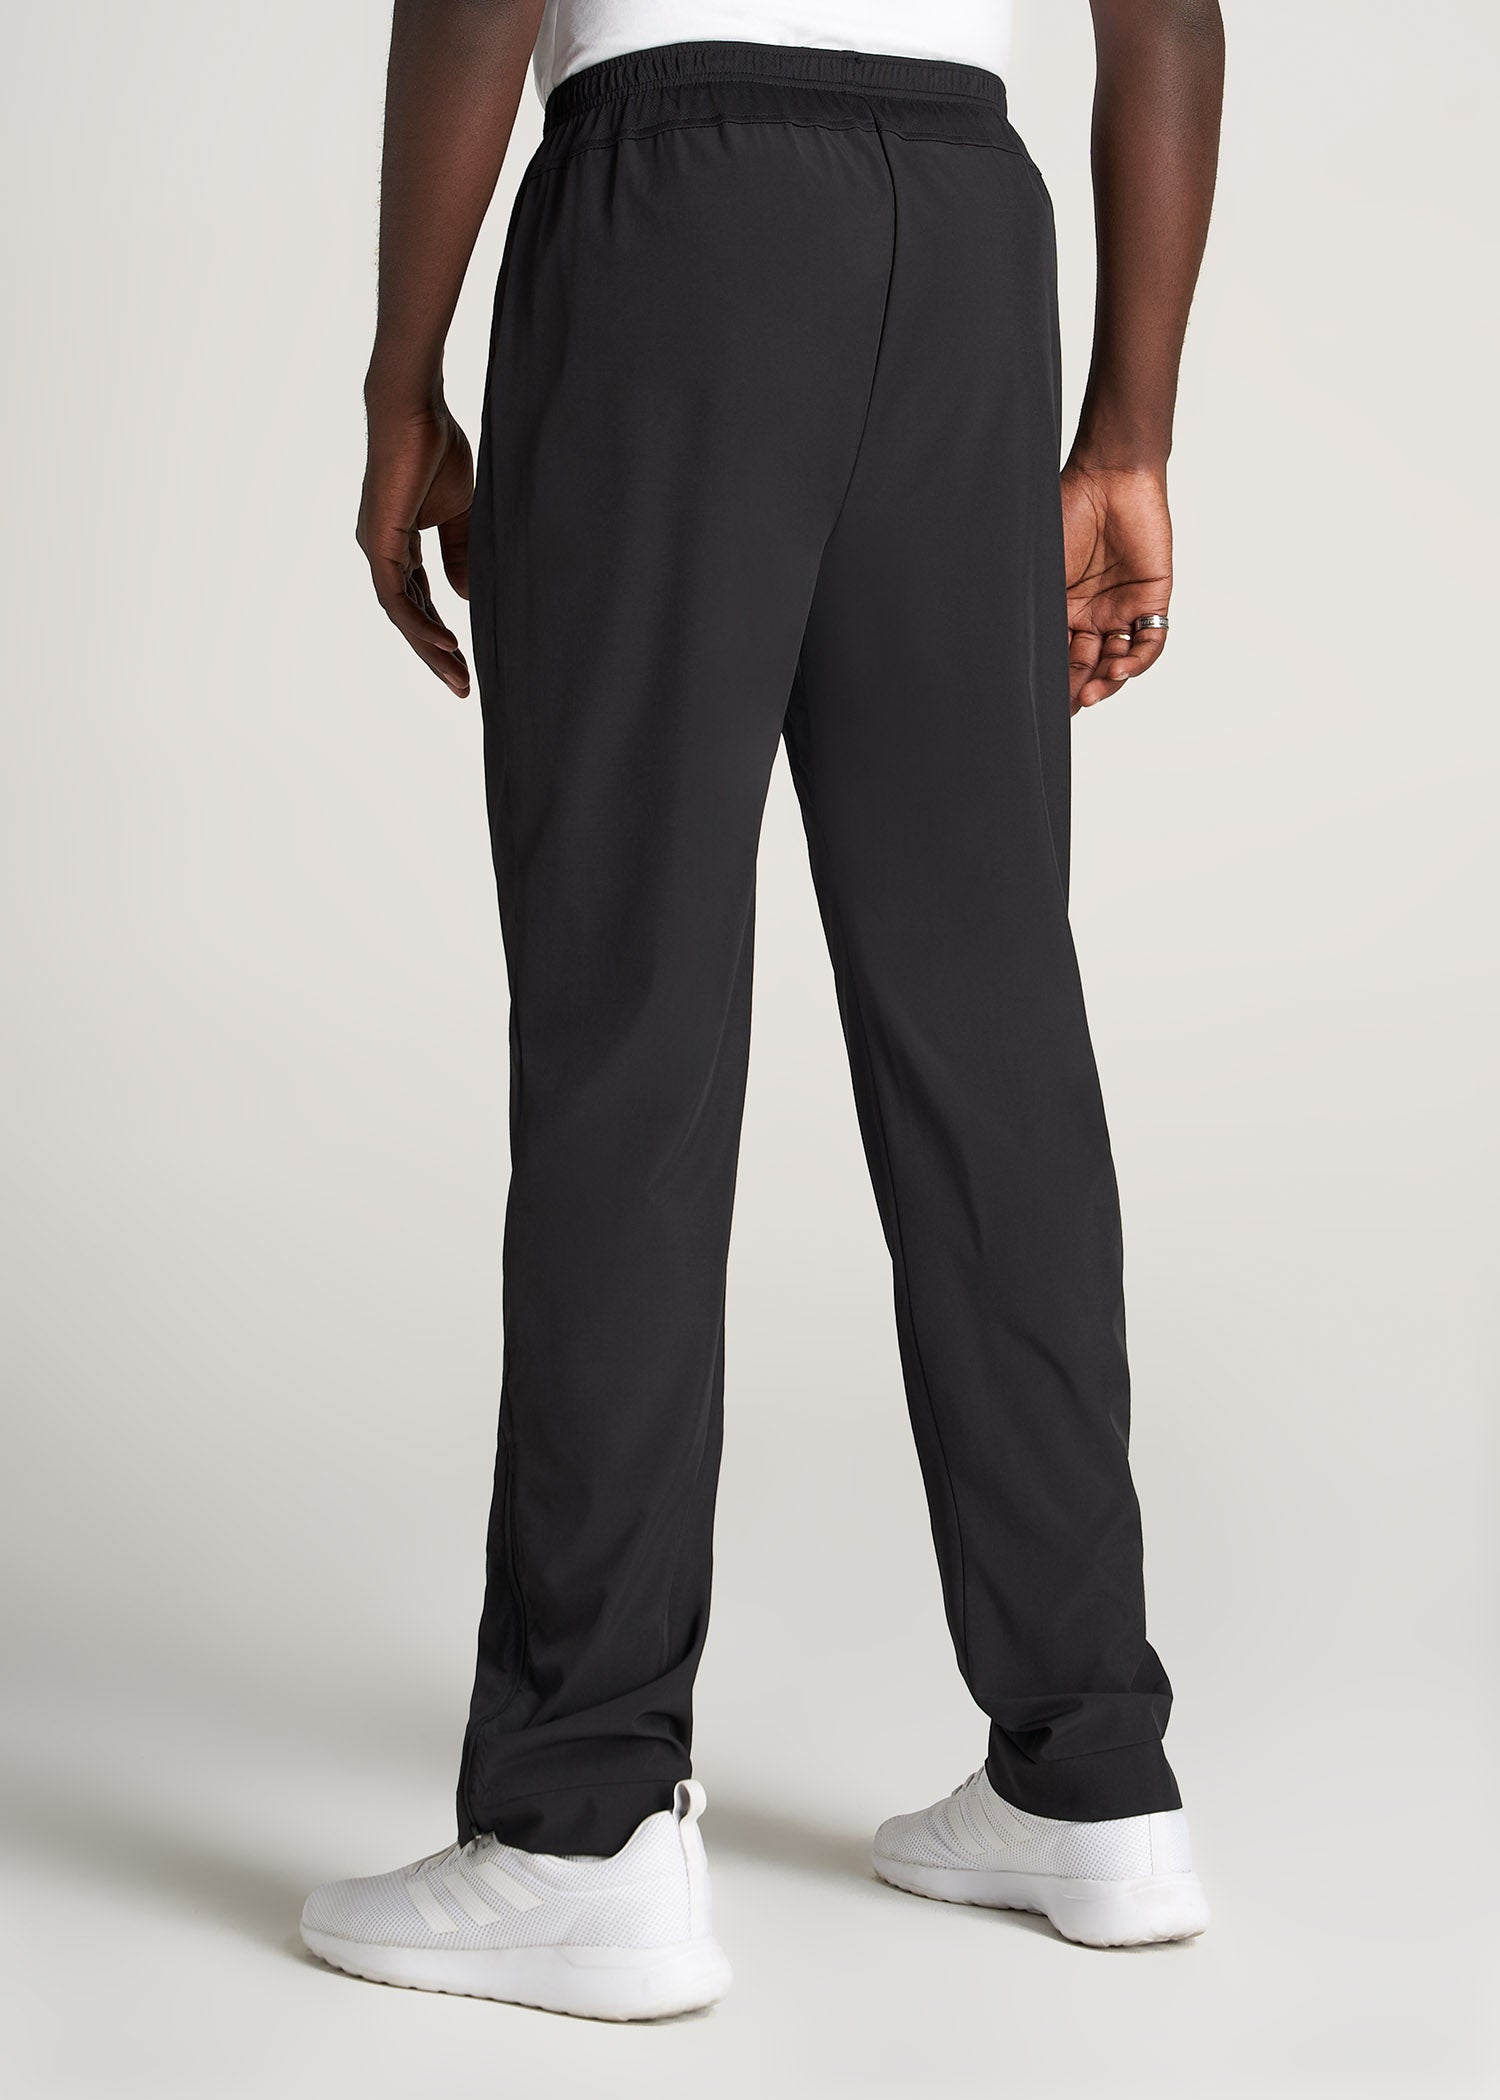     American-Tall-Men-RelaxedFit-LightWeight-AthleticPant-Black-back